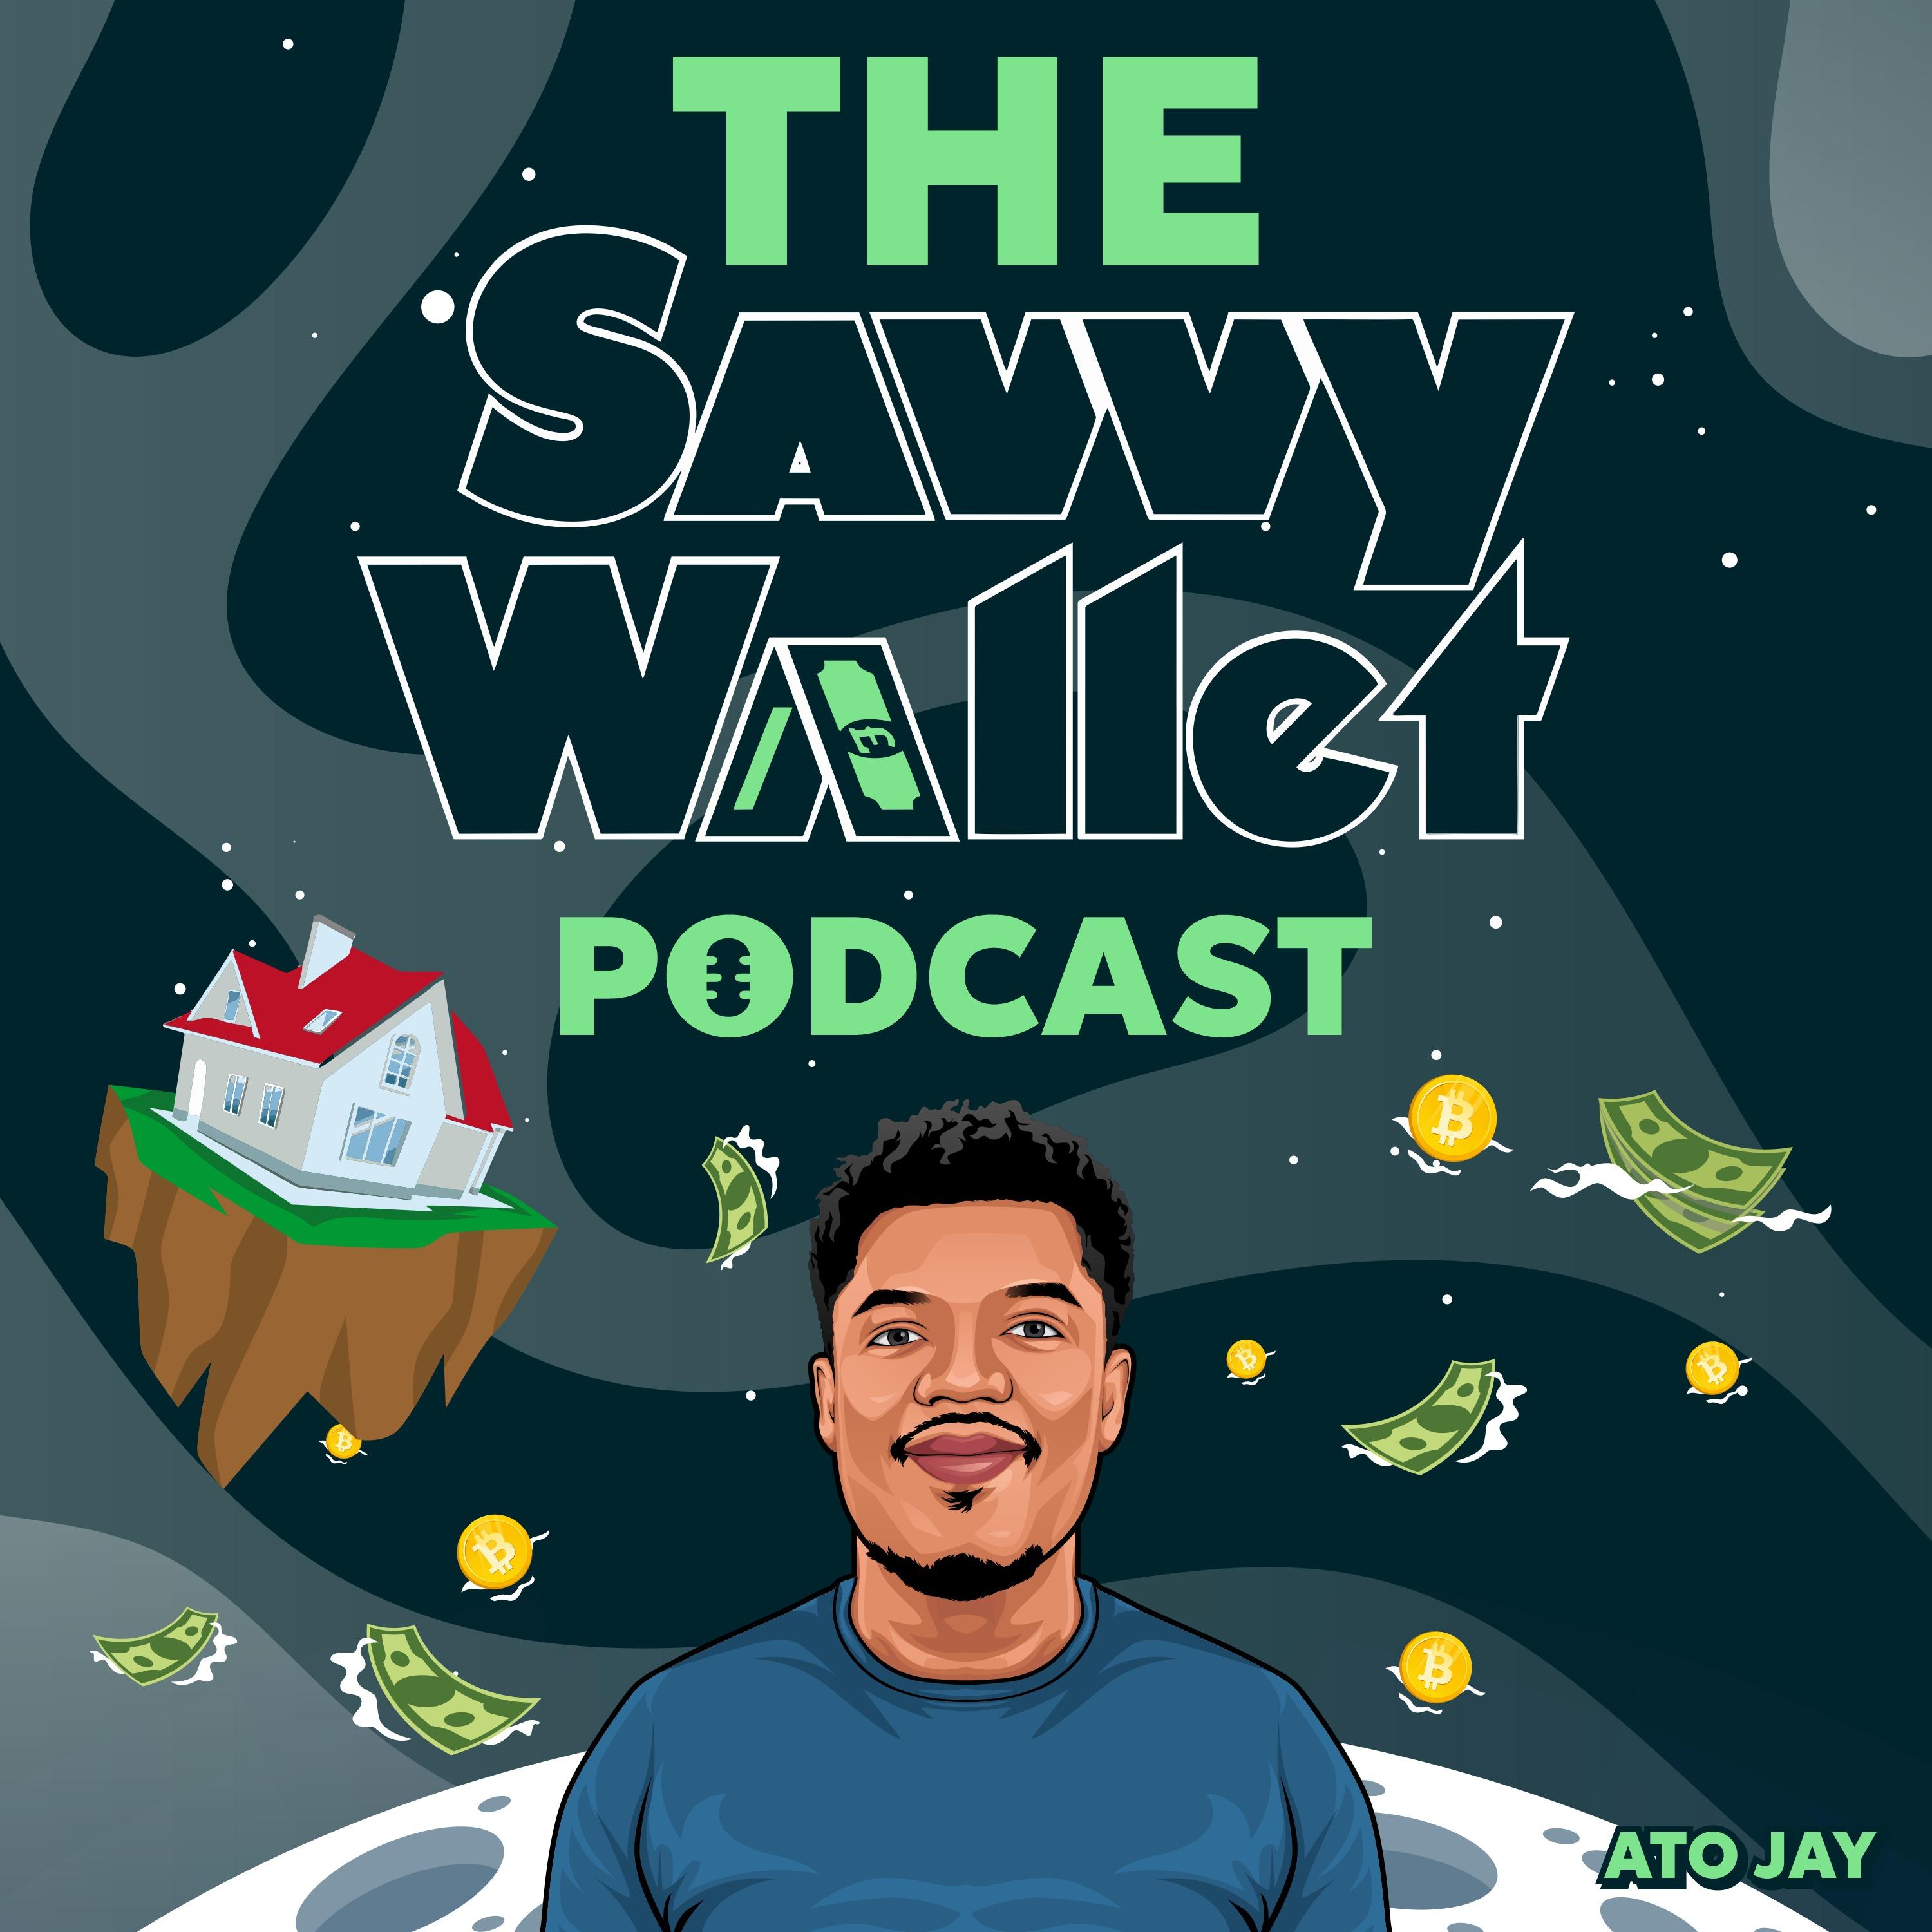  The Savvy Wallet Podcast (Formerly The Take Off Experience Podcast)